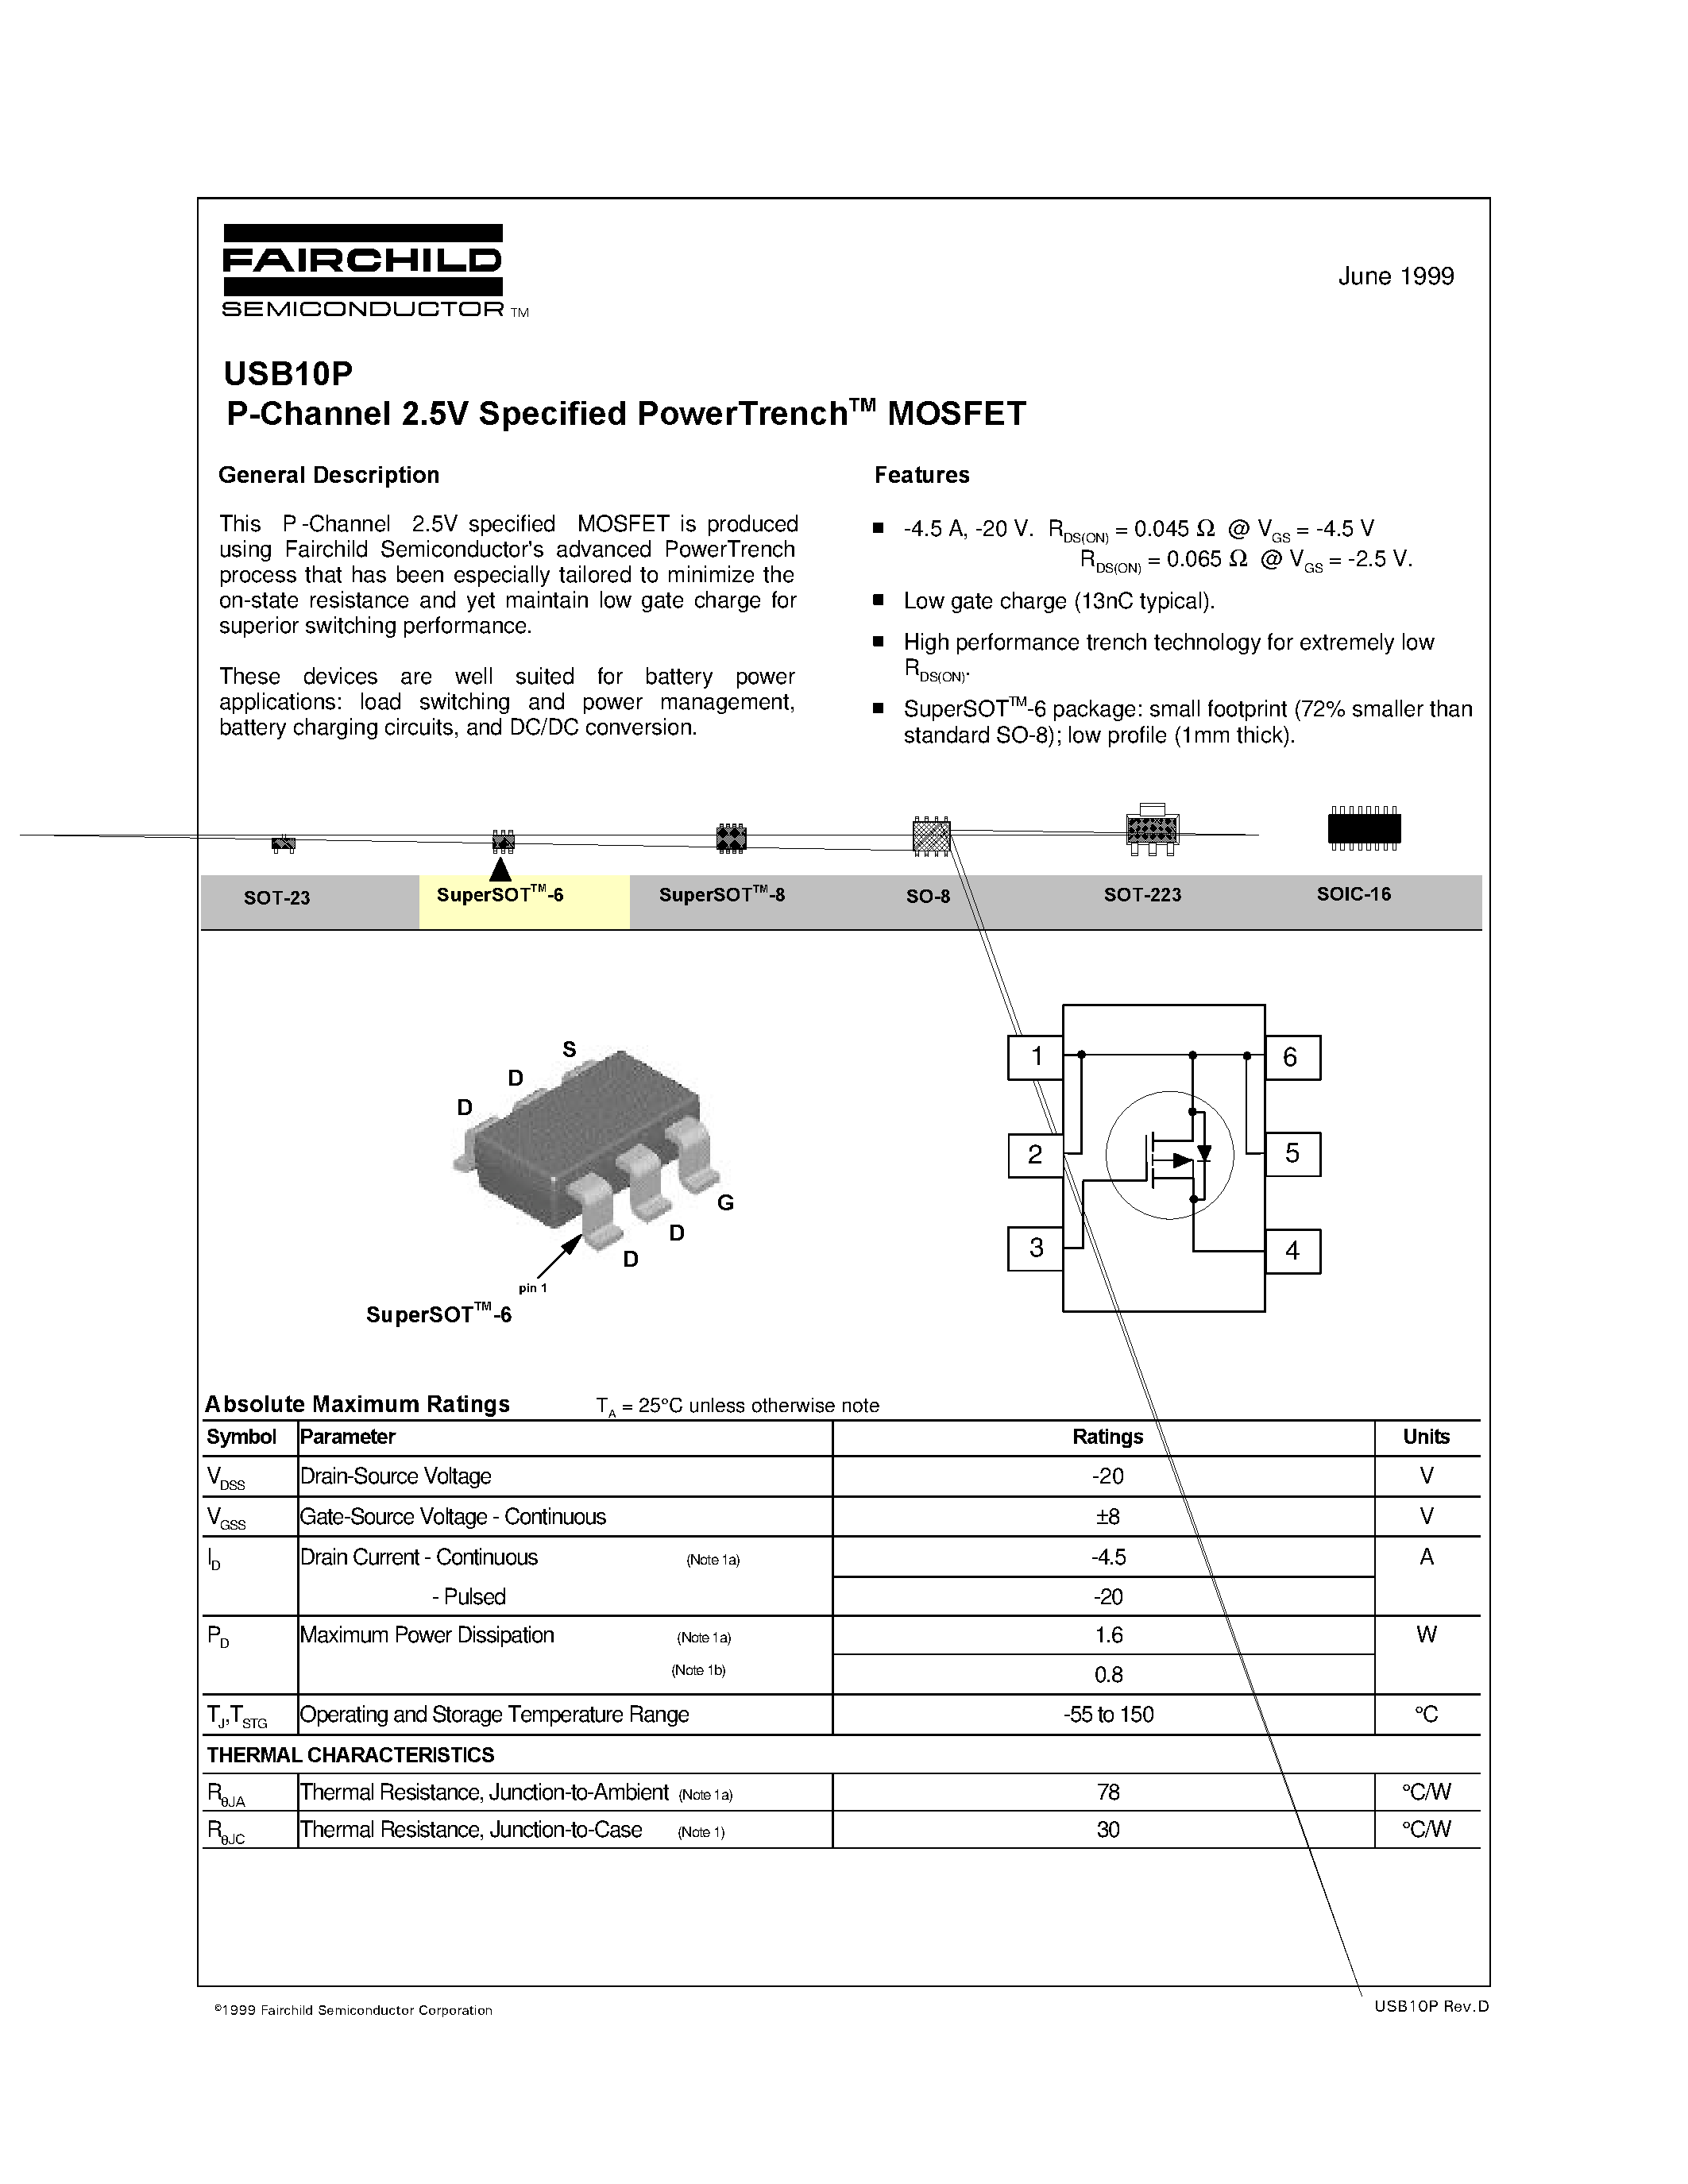 Datasheet USB10P - P-Channel 2.5V Specified PowerTrenchTM MOSFET page 1